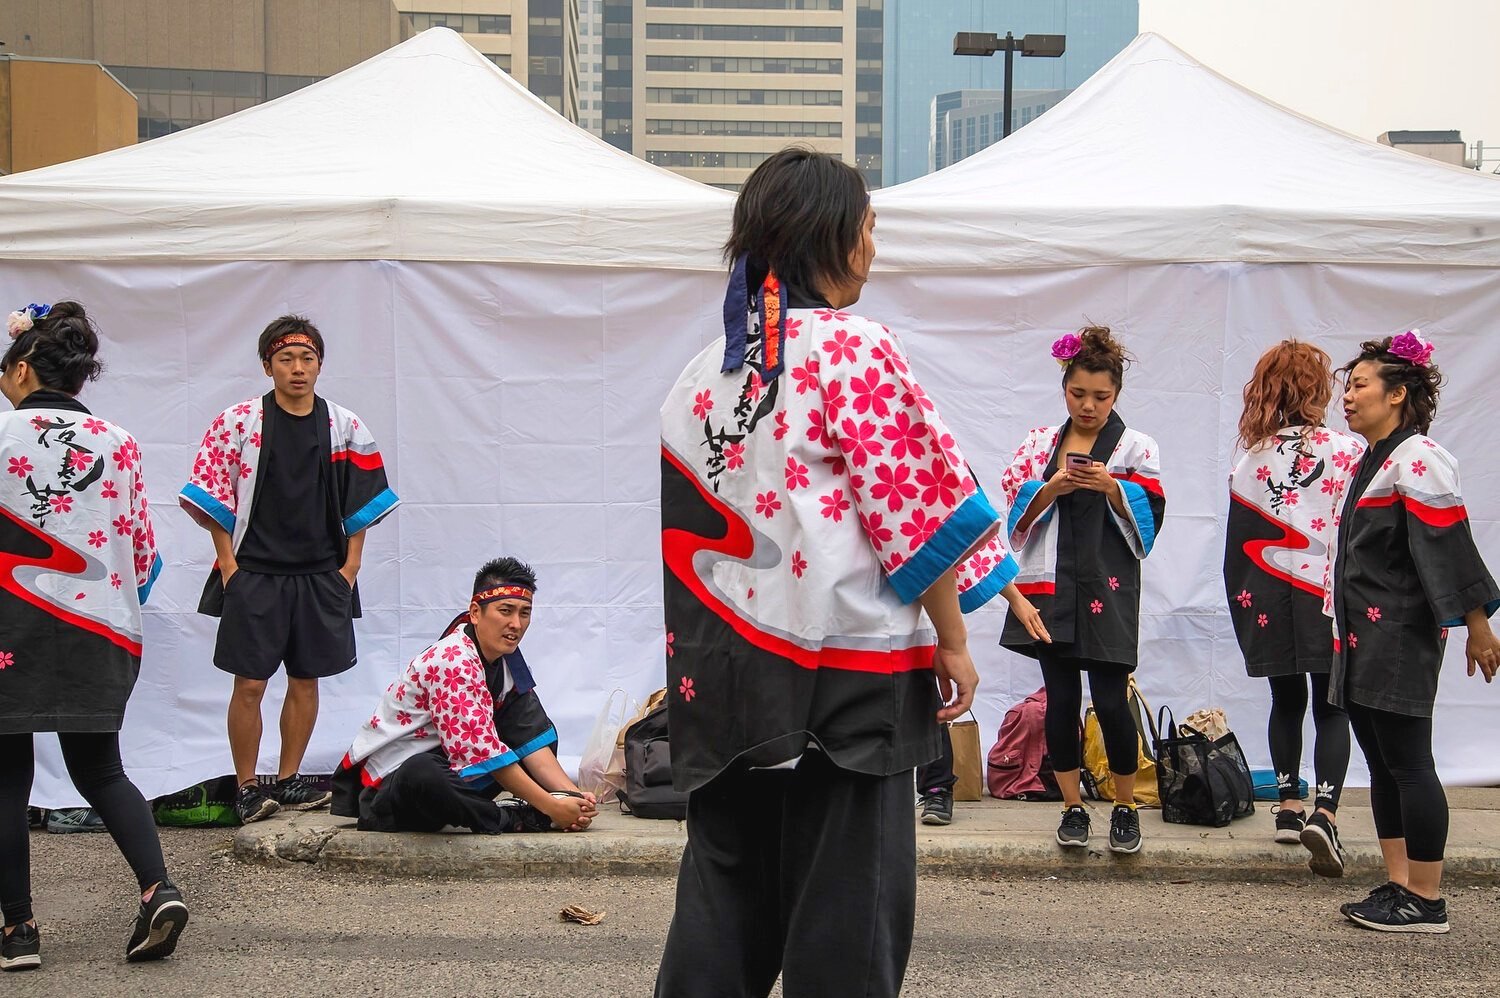  Japanese dancers prepare before performing at the Chinese Street Festival in Calgary. Chinatown helps different Asian associations to work together in promoting cultural diversity; a sentiment not always echoed in the past, especially during WWII wh